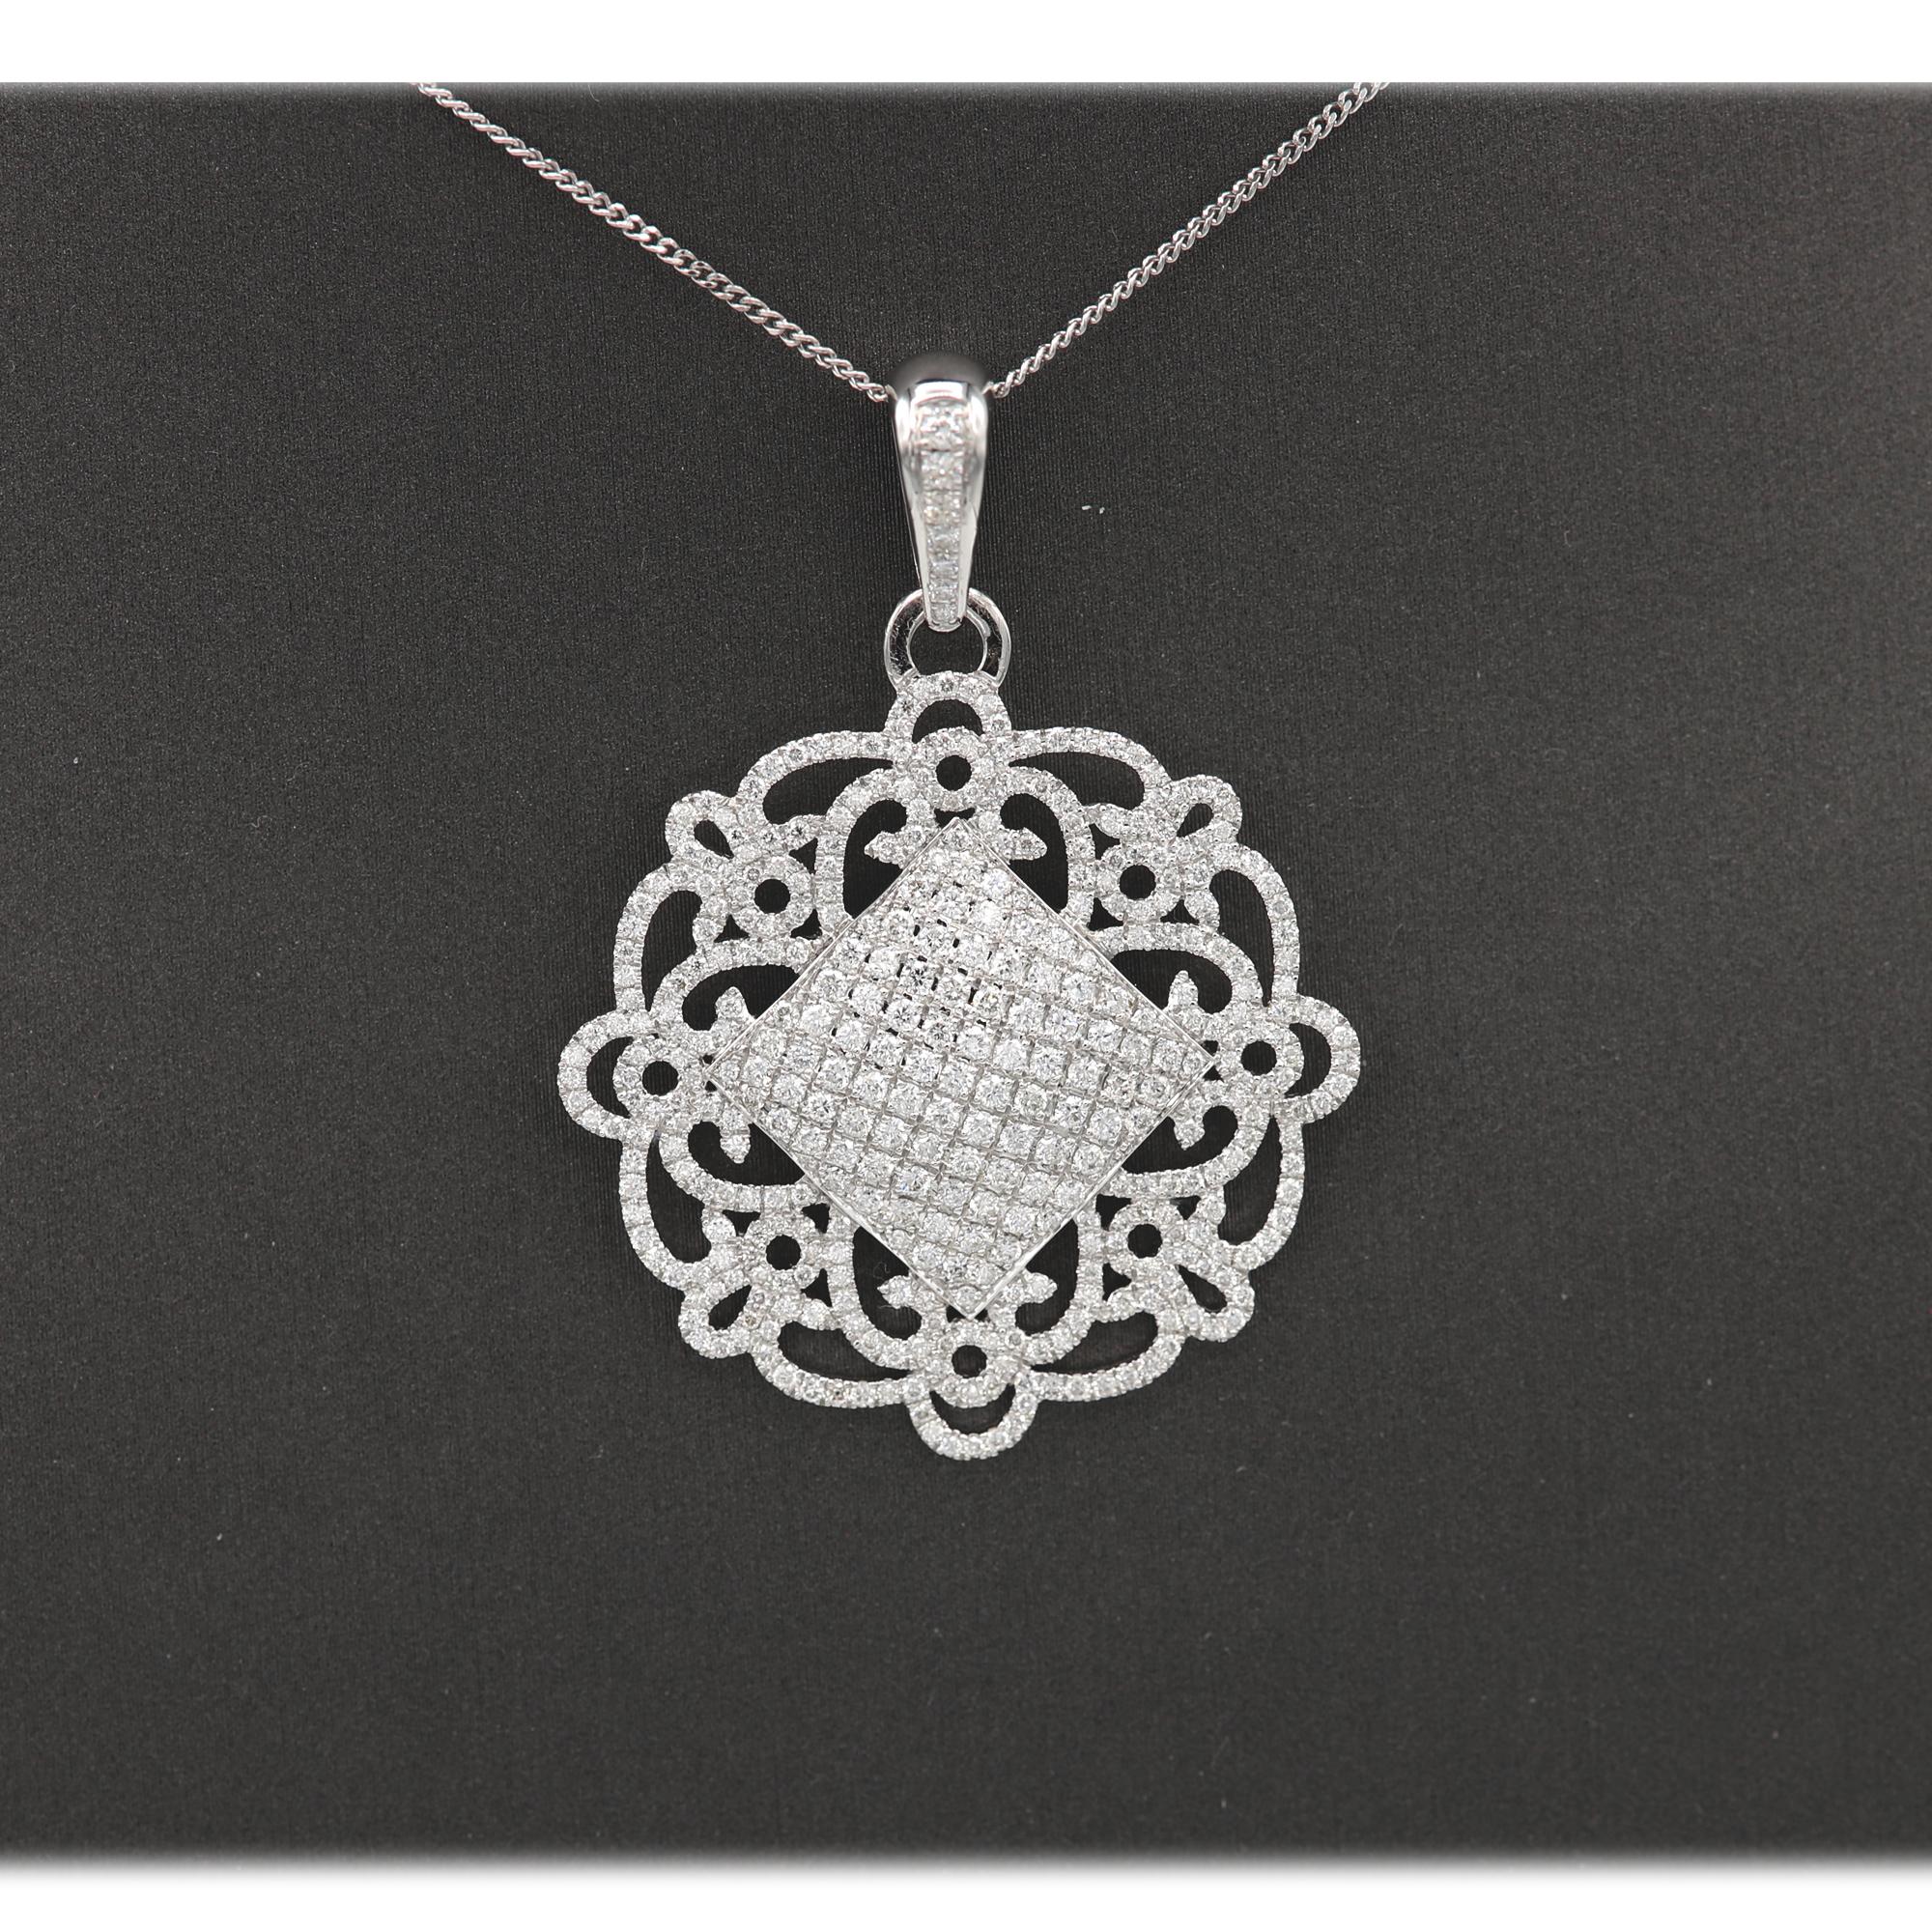 Elegant Diamond Ornament Style Pendant, Full with Diamonds. 18k White Gold 8.60 grams.
Total Diamonds 1.87 carat G-SI. Size: Approx 30 mm or 1.25' Inch. Looks much better in real.
+ Chain 16' Inch